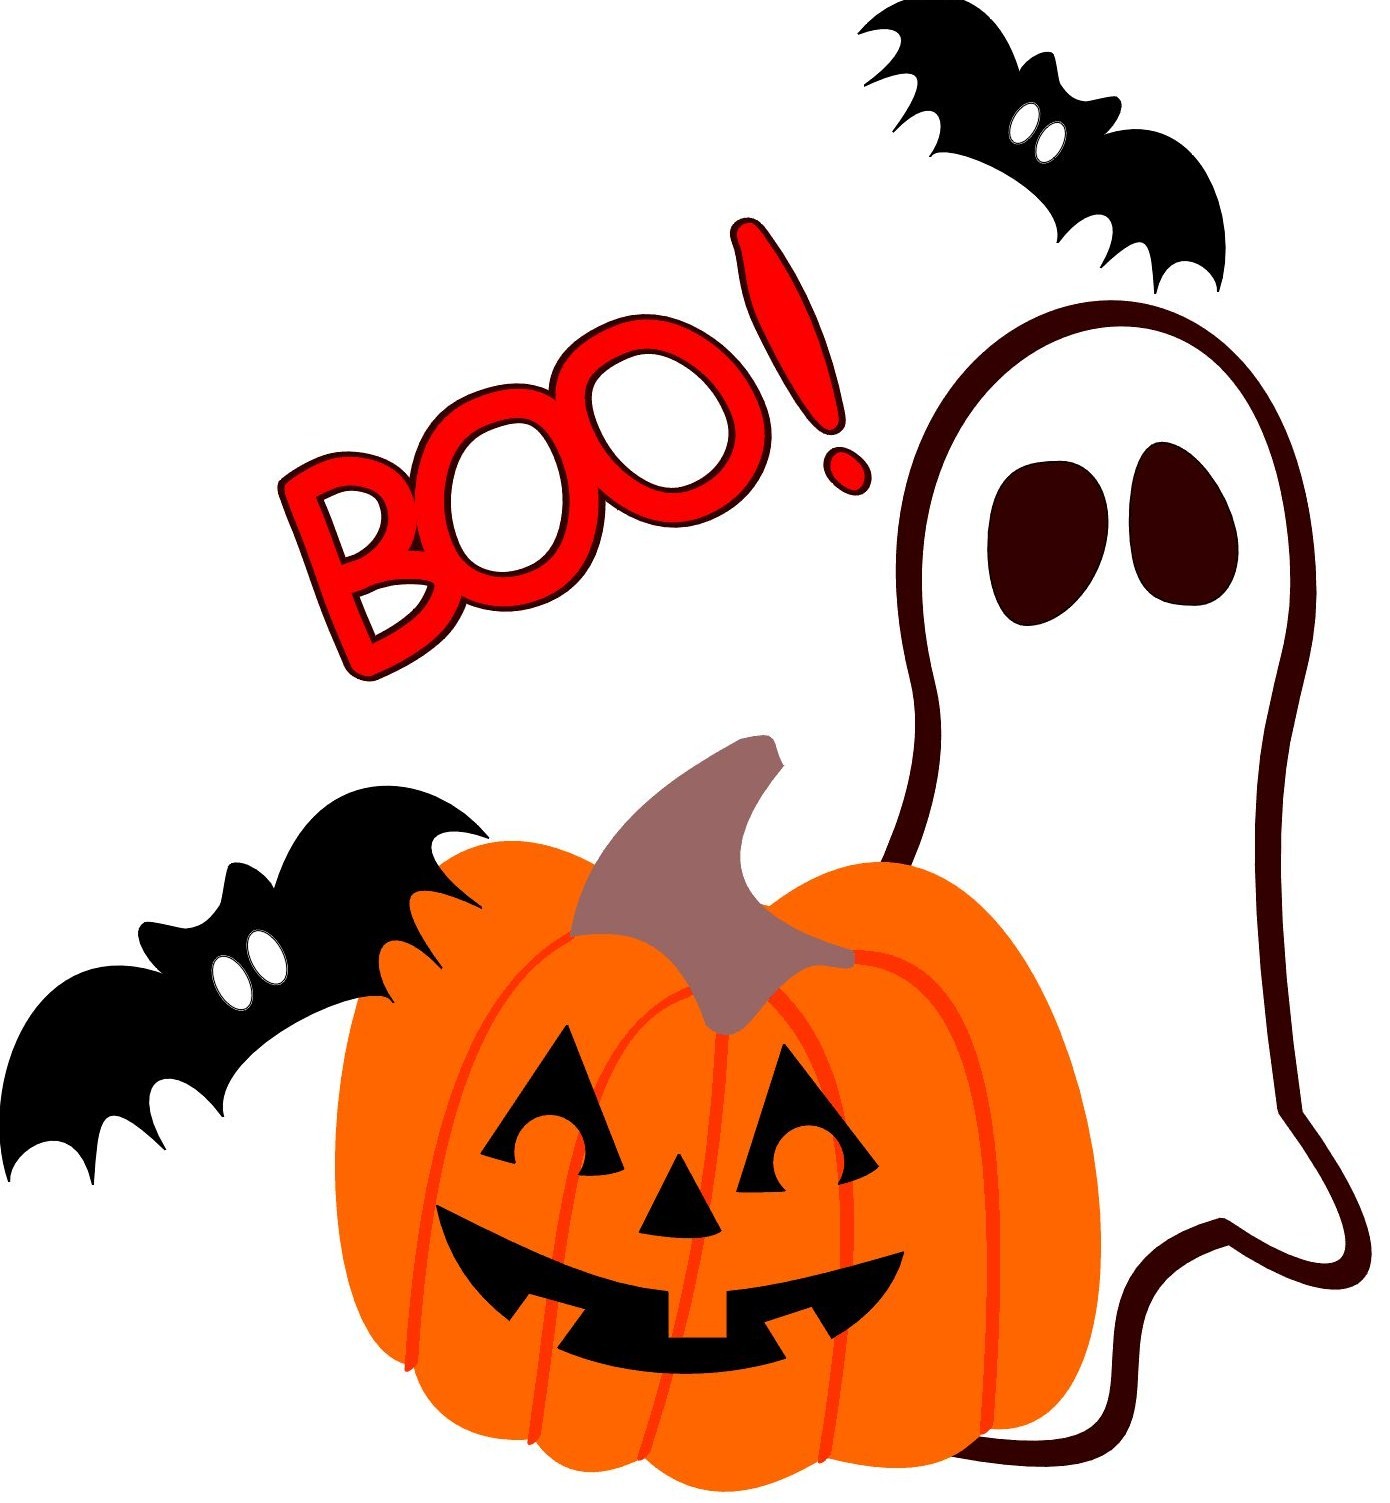 Clip art for october clipart image - Cliparting.com